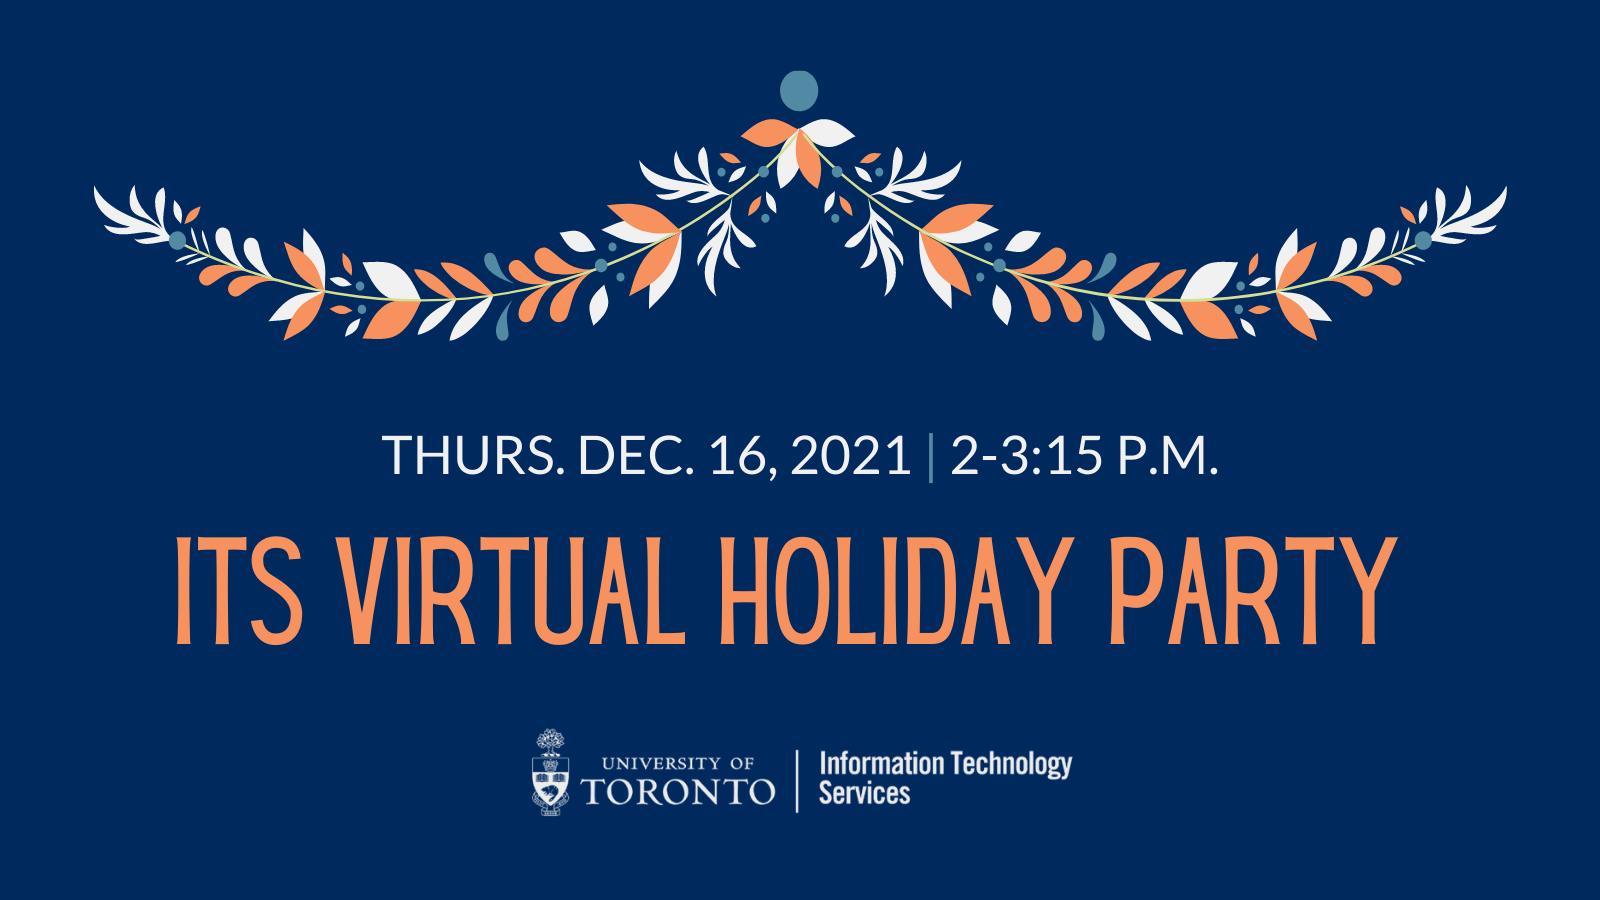 ITS Virtual Holiday Party: Thursday, December 16, 2021, 2-3:15 pm.